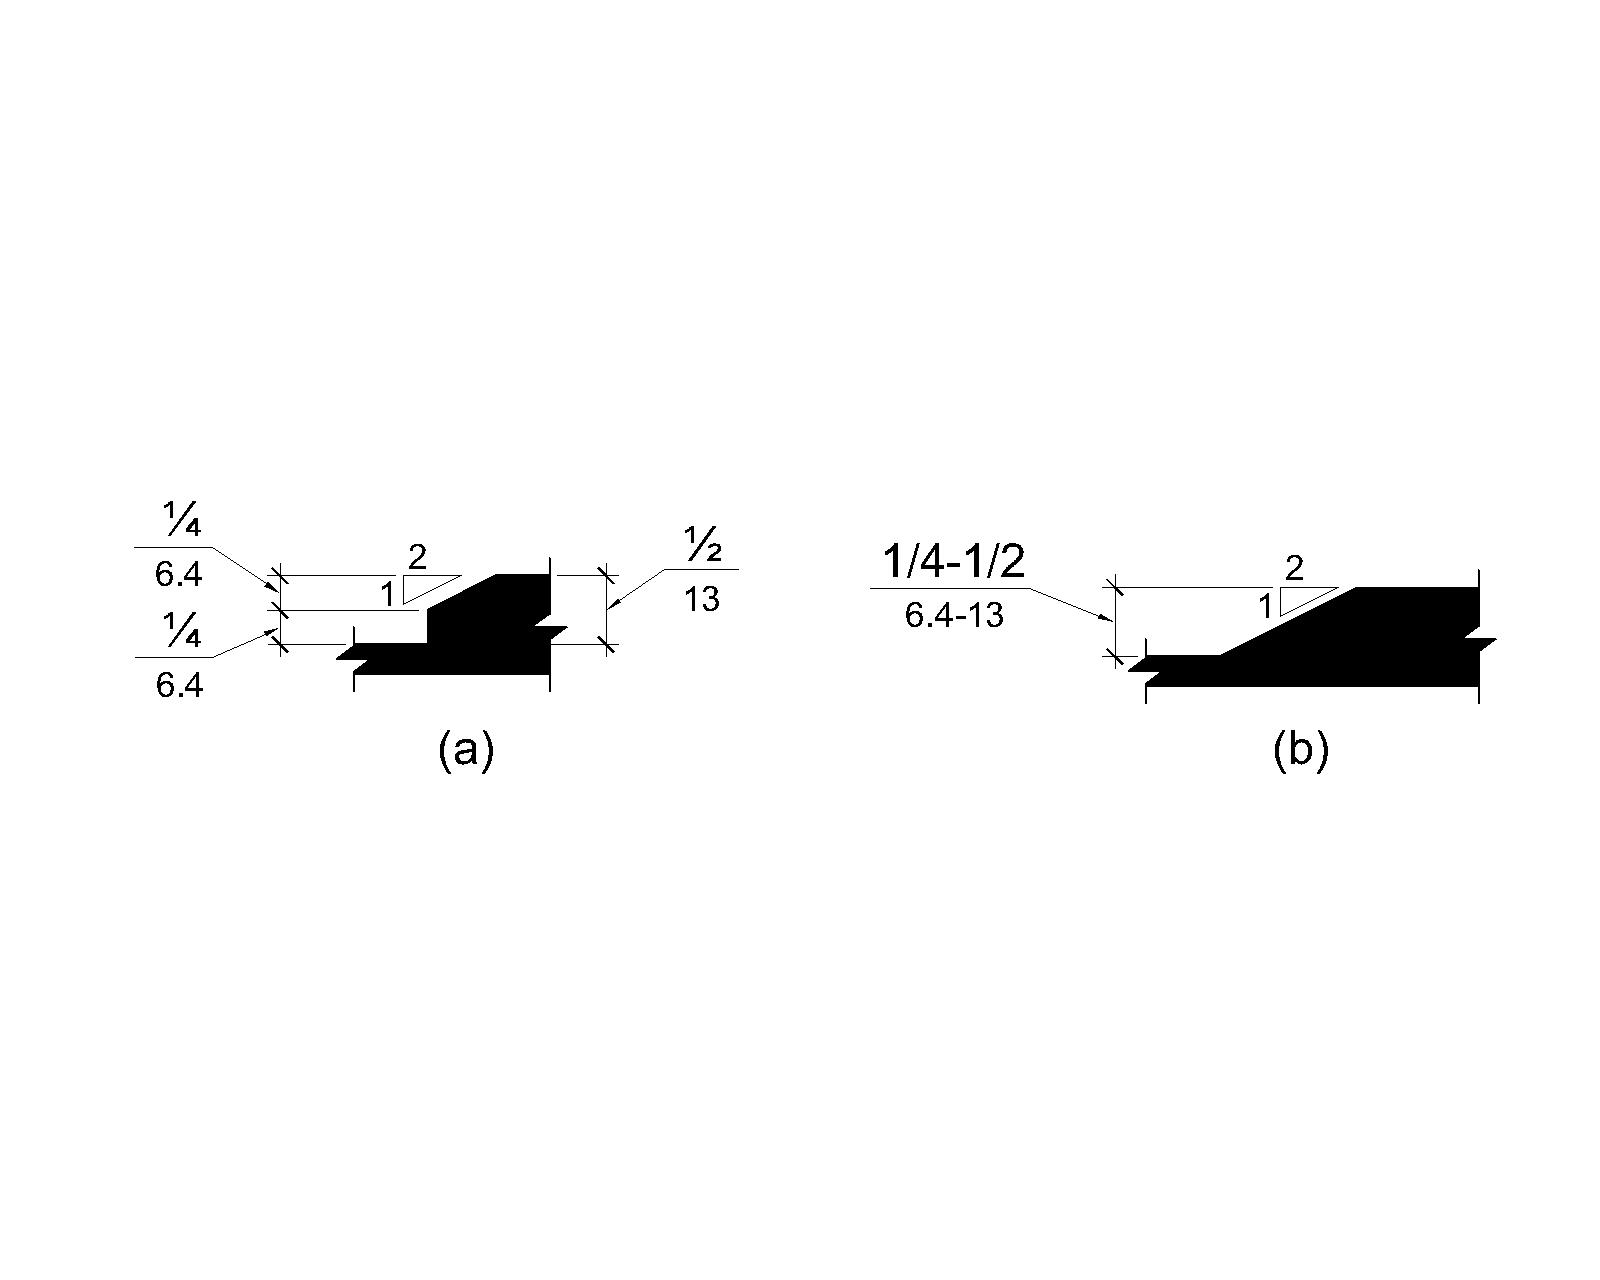 (a) Elevation drawing of a change in level ½ inches (13 mm) high with the first ¼ inch (6.4 mm) being vertical and the remaining ¼ inches (6.4 mm) being beveled with a slope of 1:2. (b) Elevation drawing of a change in level ½ inches (13 mm) high that is beveled with a slope of 1:2.